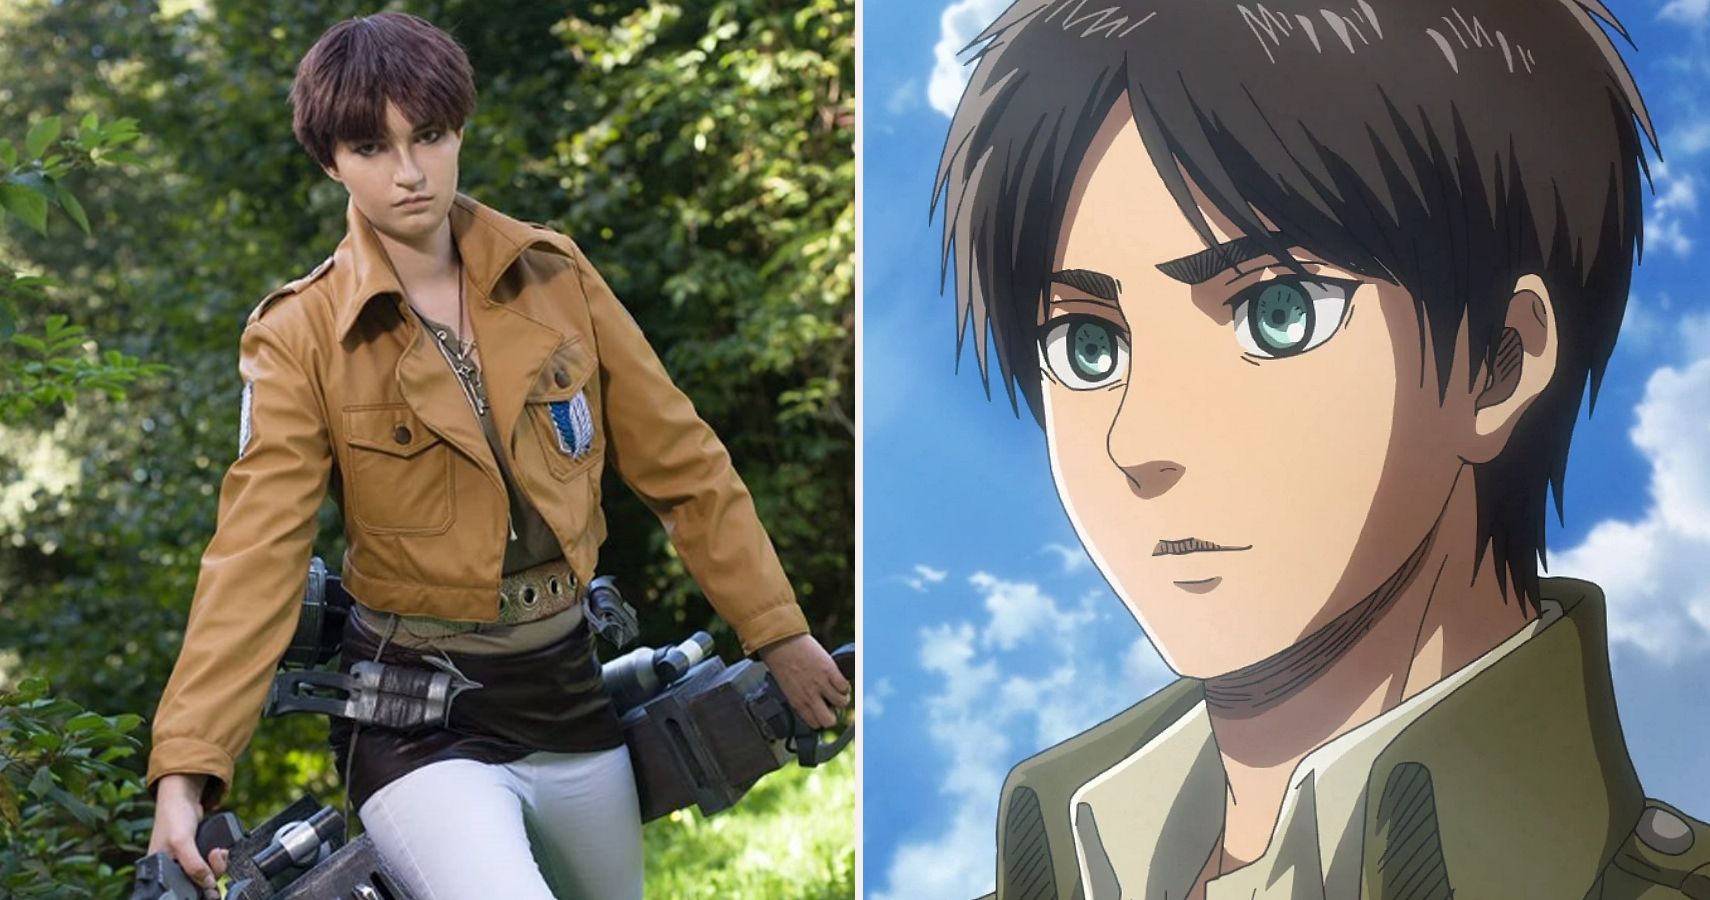 Attack On Titan 10 Eren Cosplay That Look Just Like The Anime That hair length was just right for him. attack on titan 10 eren cosplay that